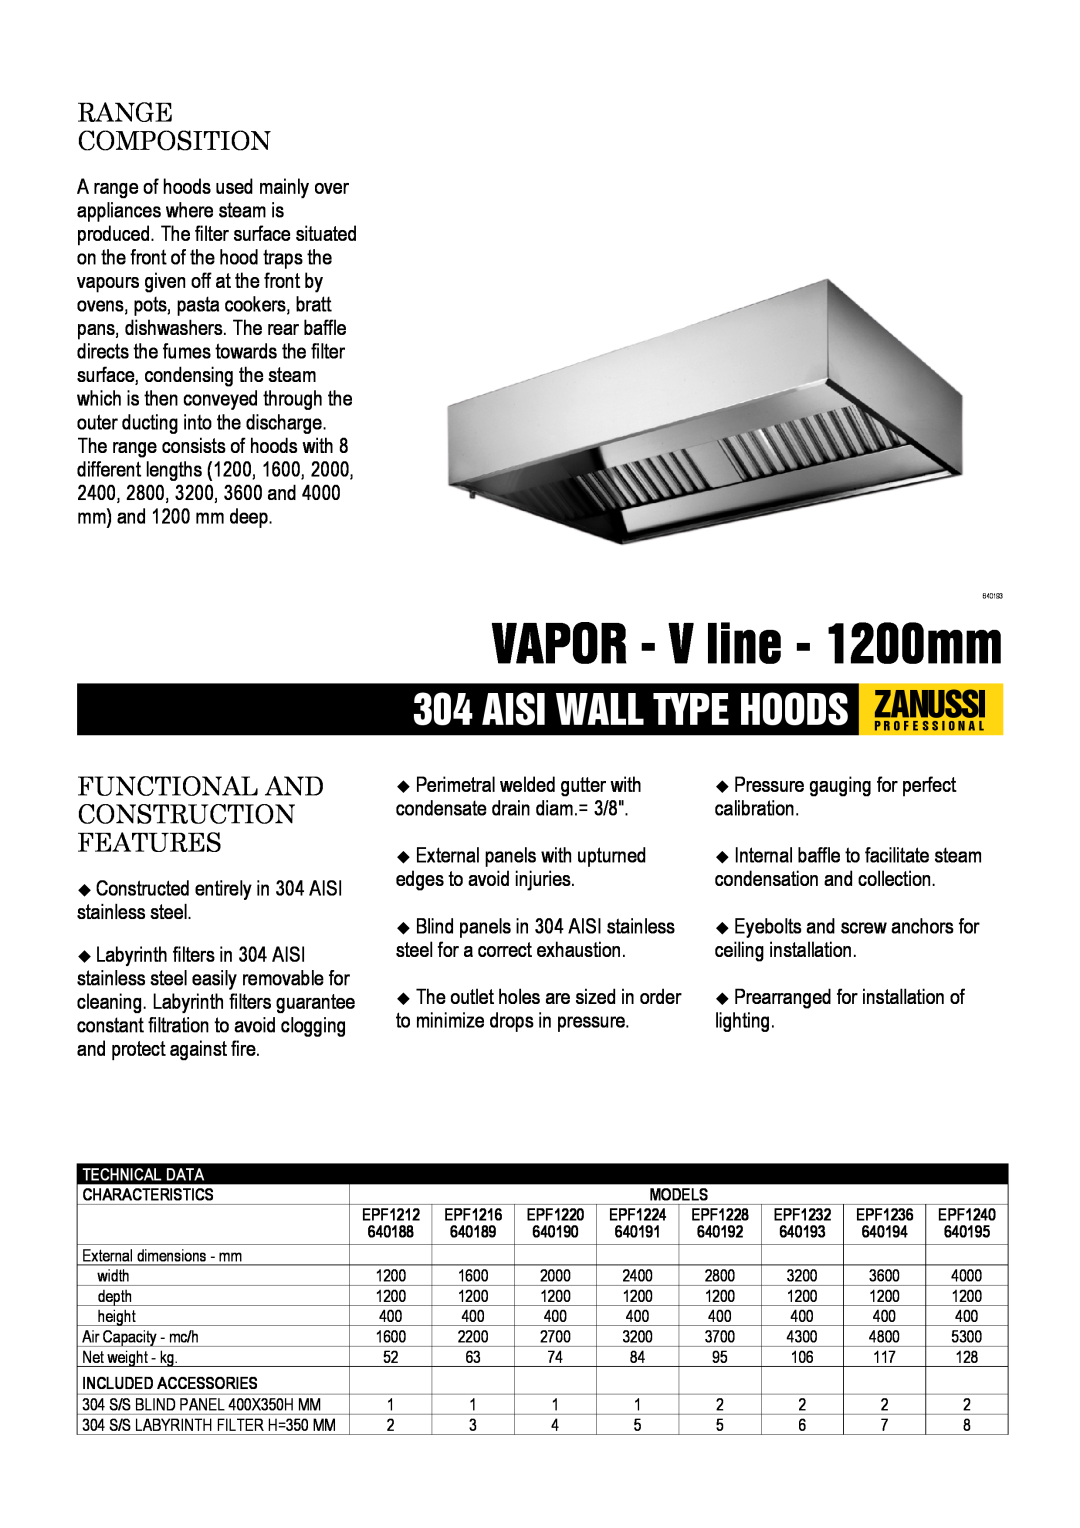 Zanussi EPF1236, EPF1240 dimensions VAPOR - V line - 1200mm, Range Composition, Functional And Construction Features 